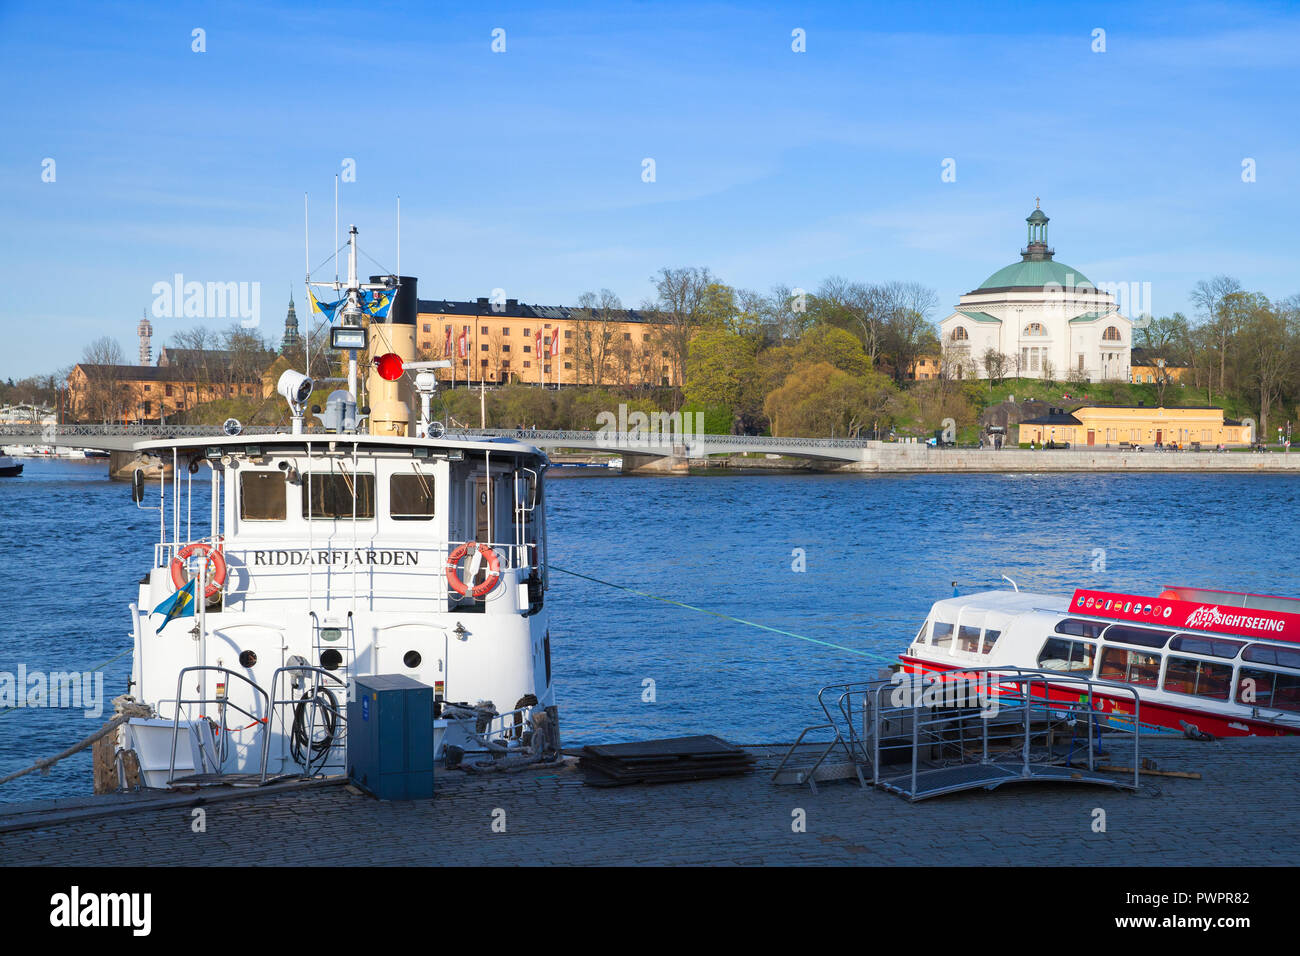 Stockholm, Sweden - May 3, 2016: Passenger ferries moored in Stockholm city Stock Photo